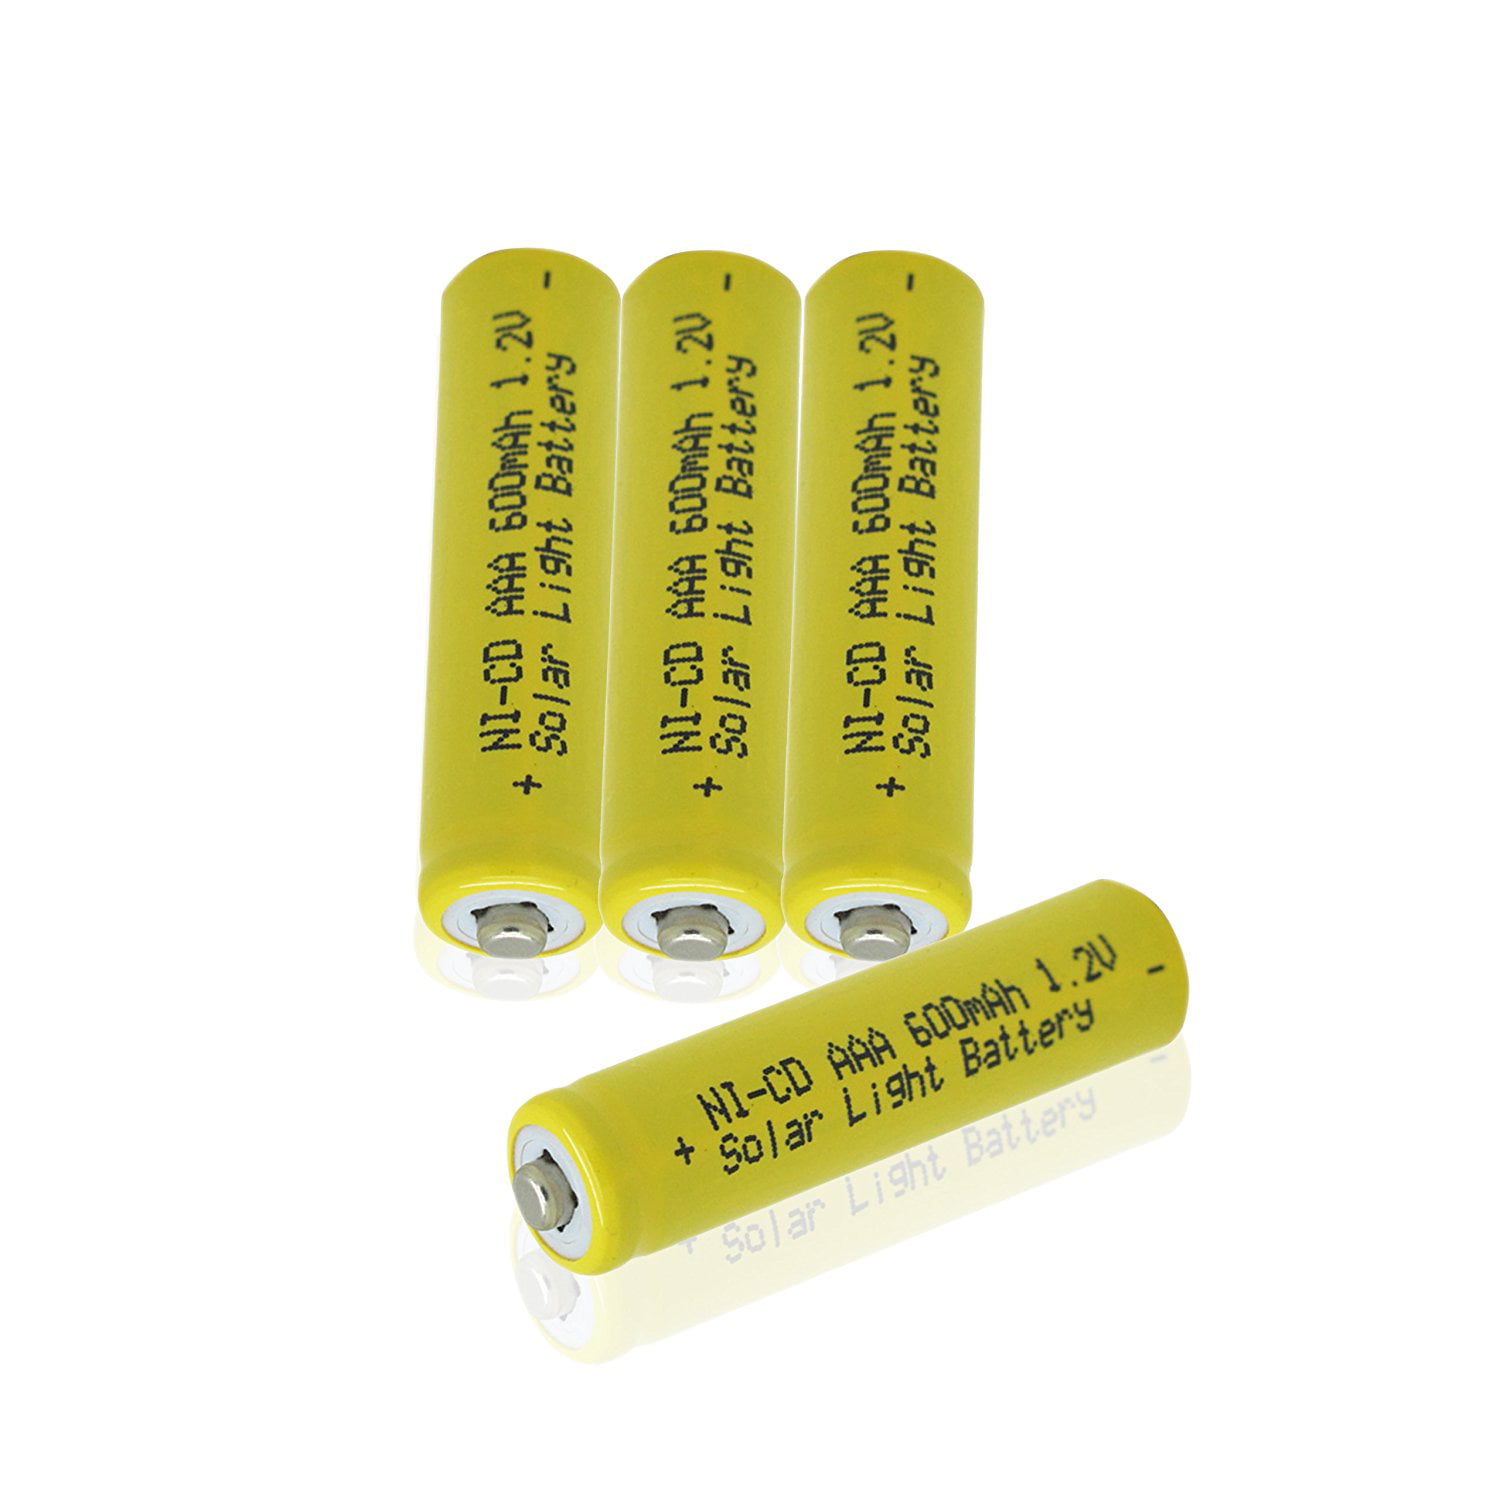 GEILIENERGY NiCd AAA 1.2V 600mAh Triple A Rechargeable Batteries for Solar Light Lamp Yellow Color Pack of 8 